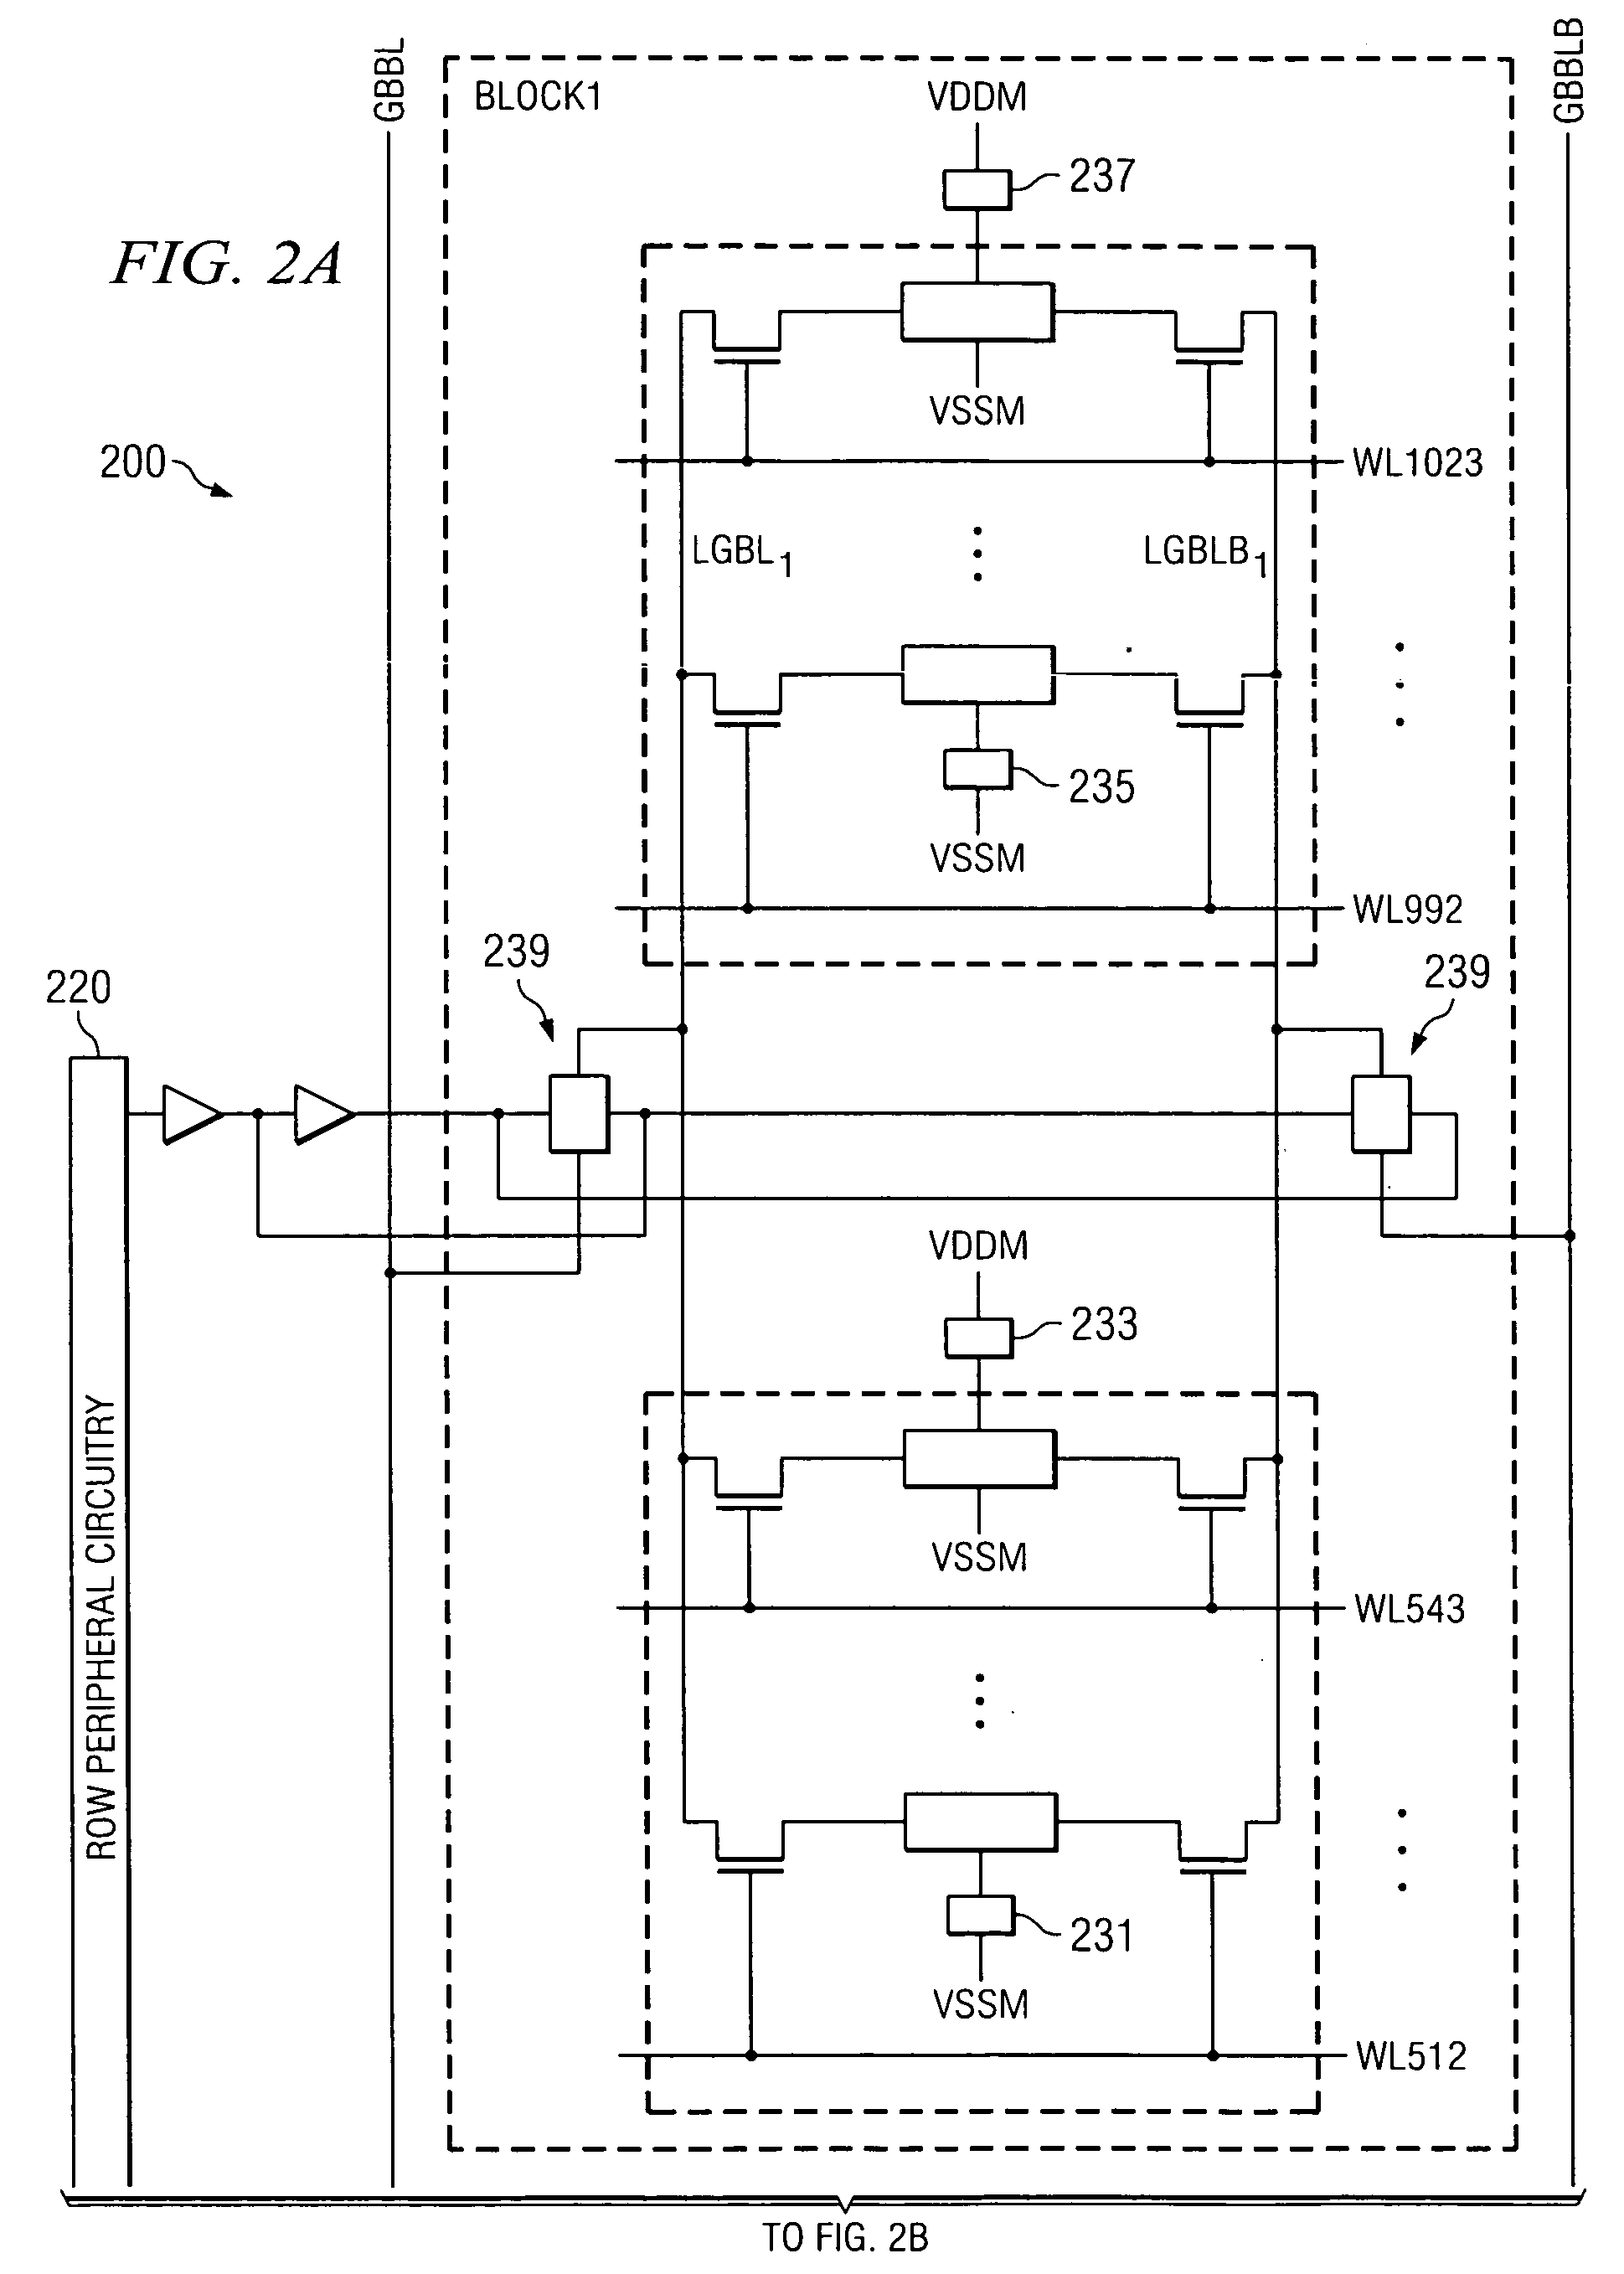 High performance, low leakage SRAM device and a method of placing a portion of memory cells of an SRAM device in an active mode